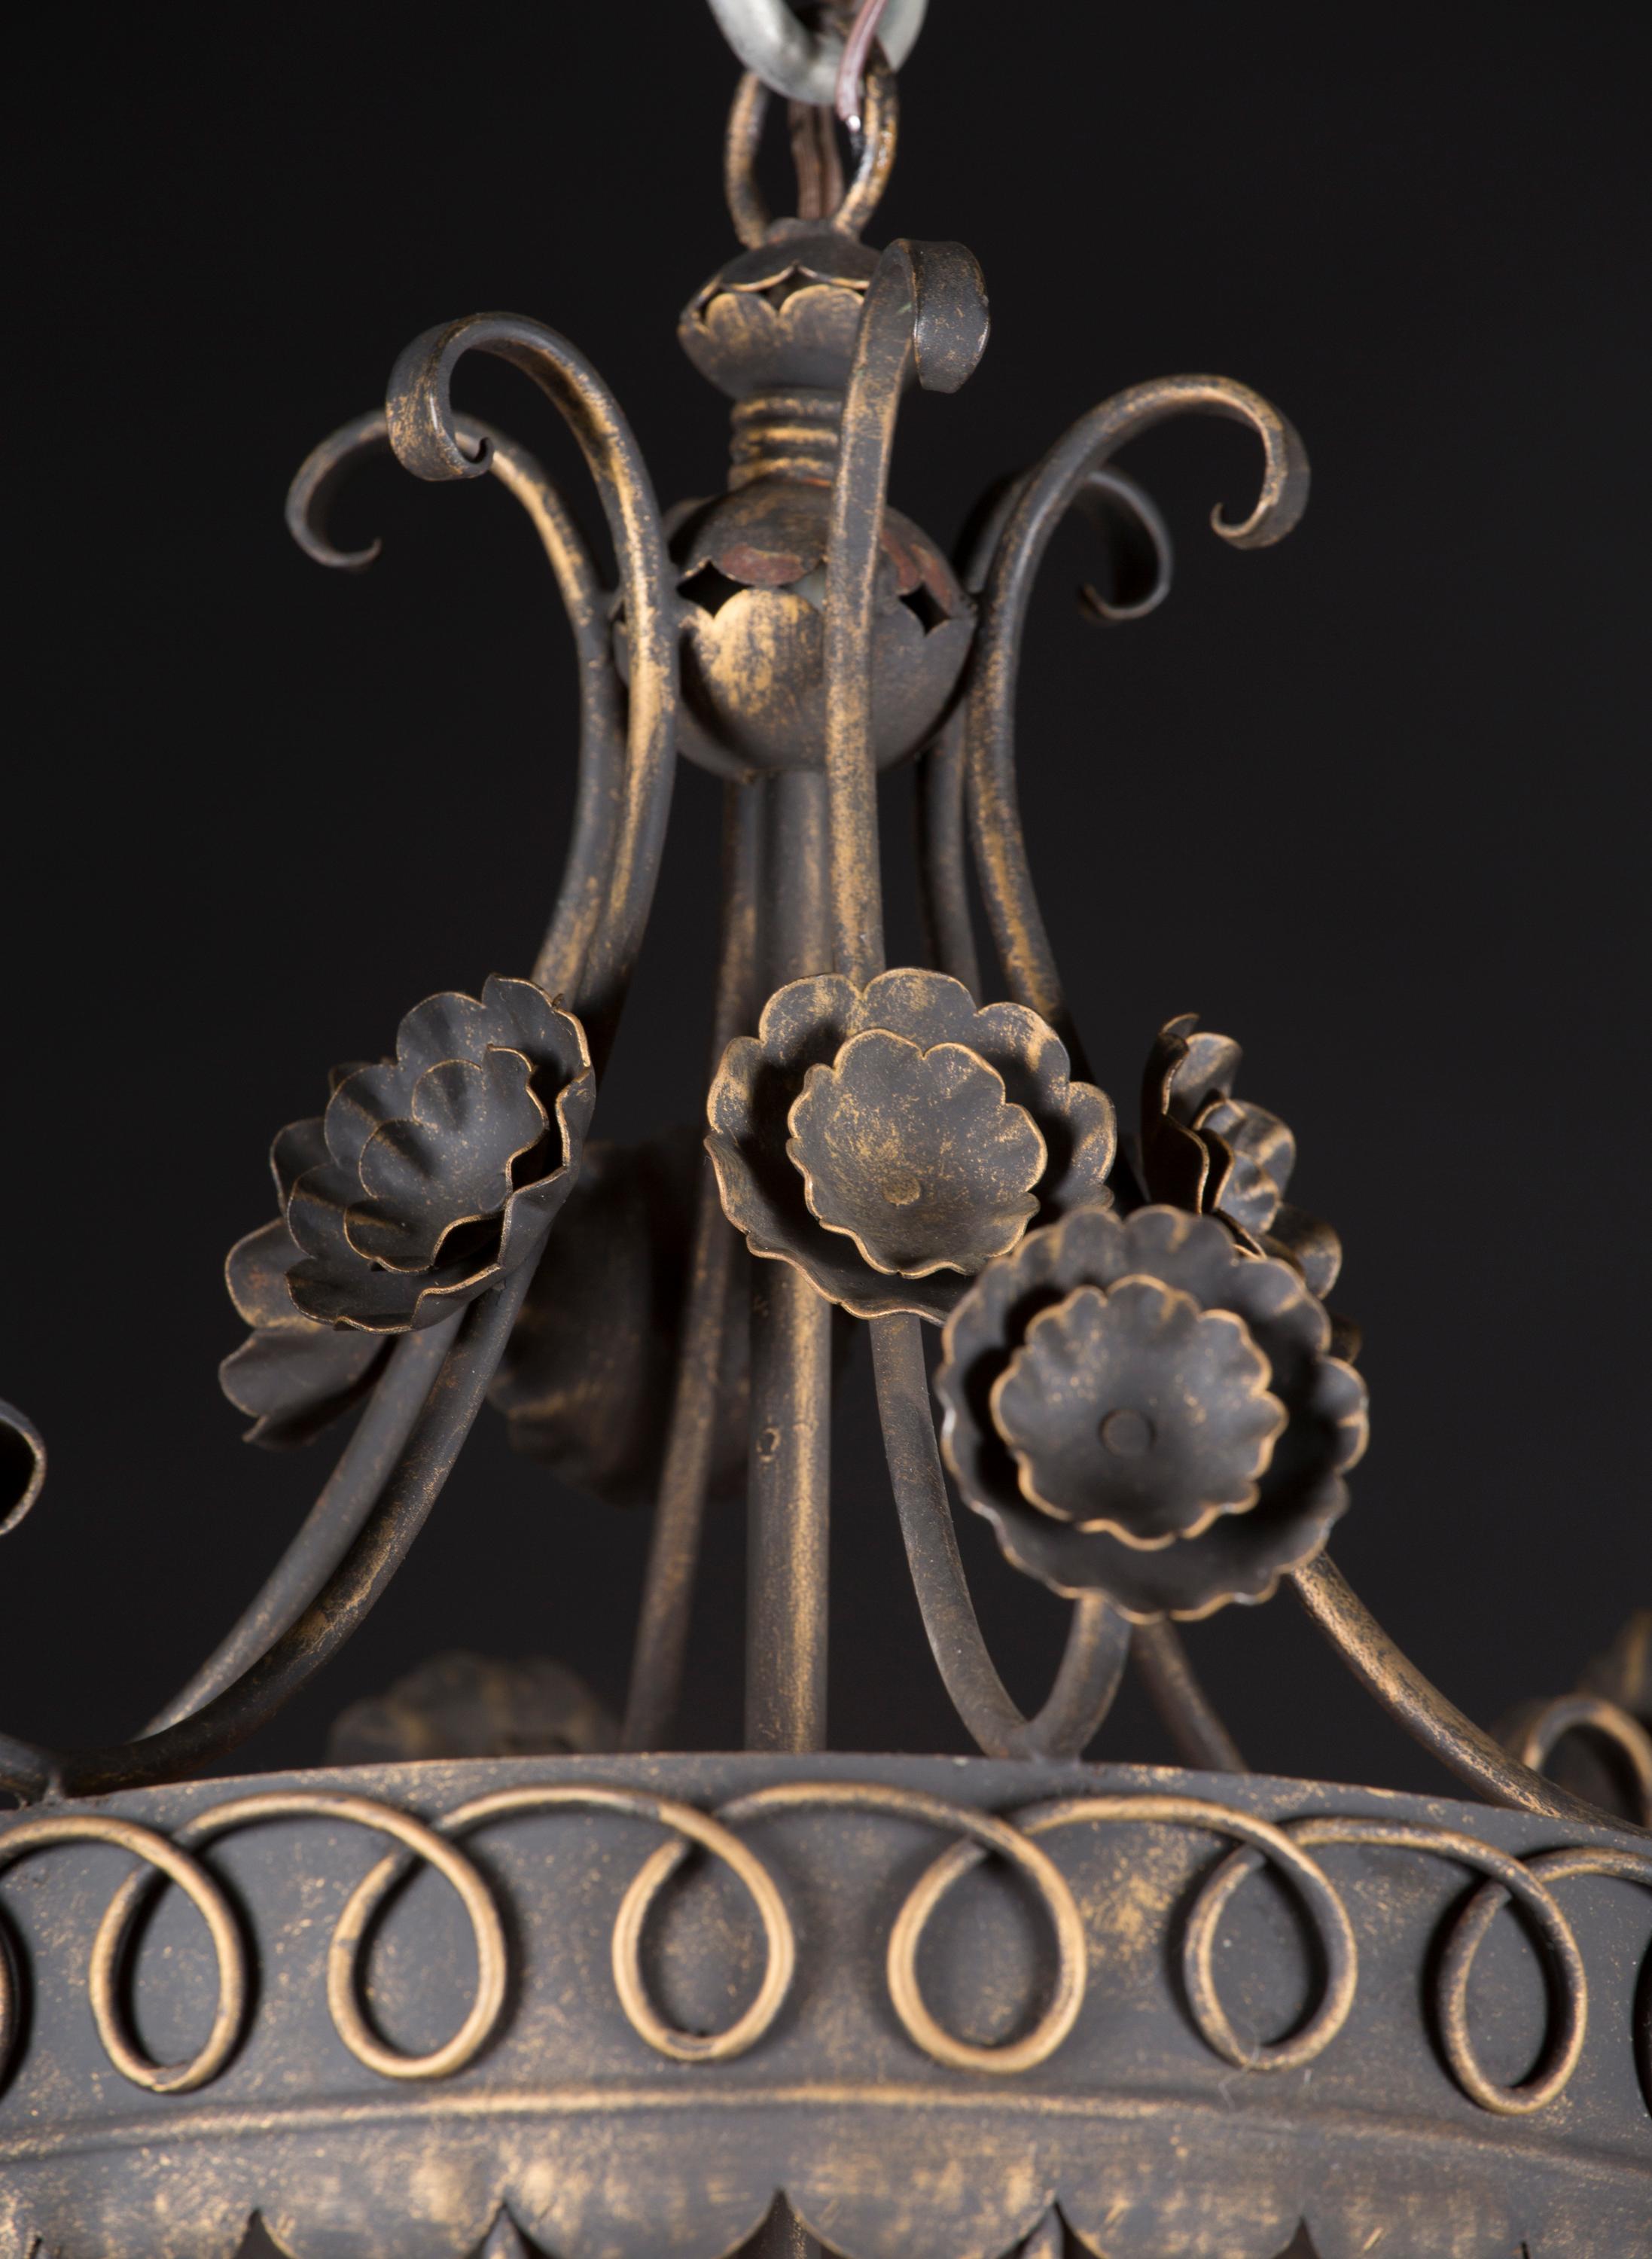 This beautiful French patinated iron lantern dates back to the mid 20th century. The top features scroll work, descending to the lantern body through outreaching flowers. The body itself is detailed with simple pattern work, as well as vines with